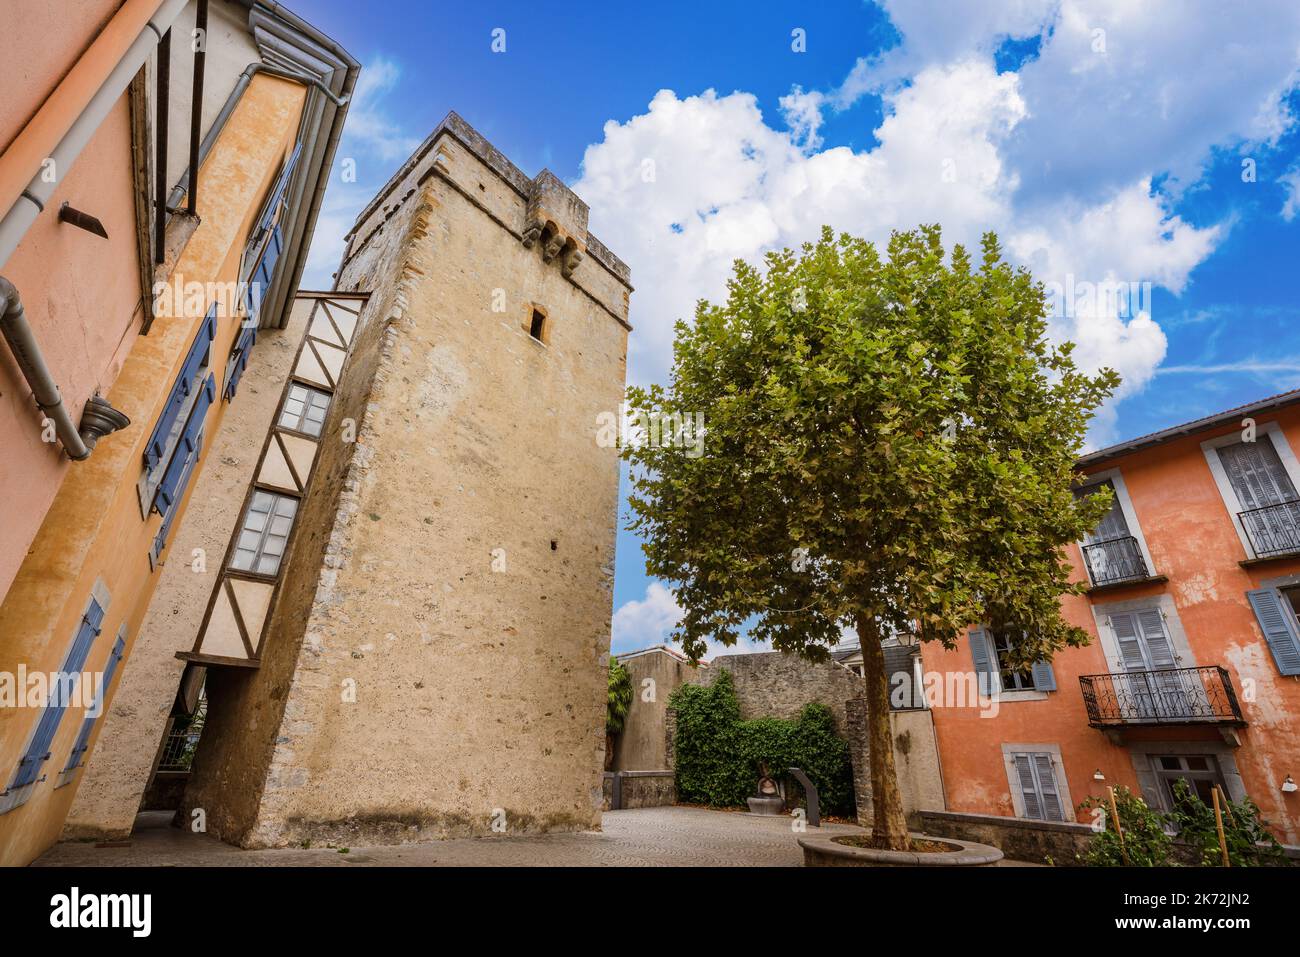 Tour de Garnavie, medieval tower built in the 14th century in the Lourdes Old Town France Stock Photo